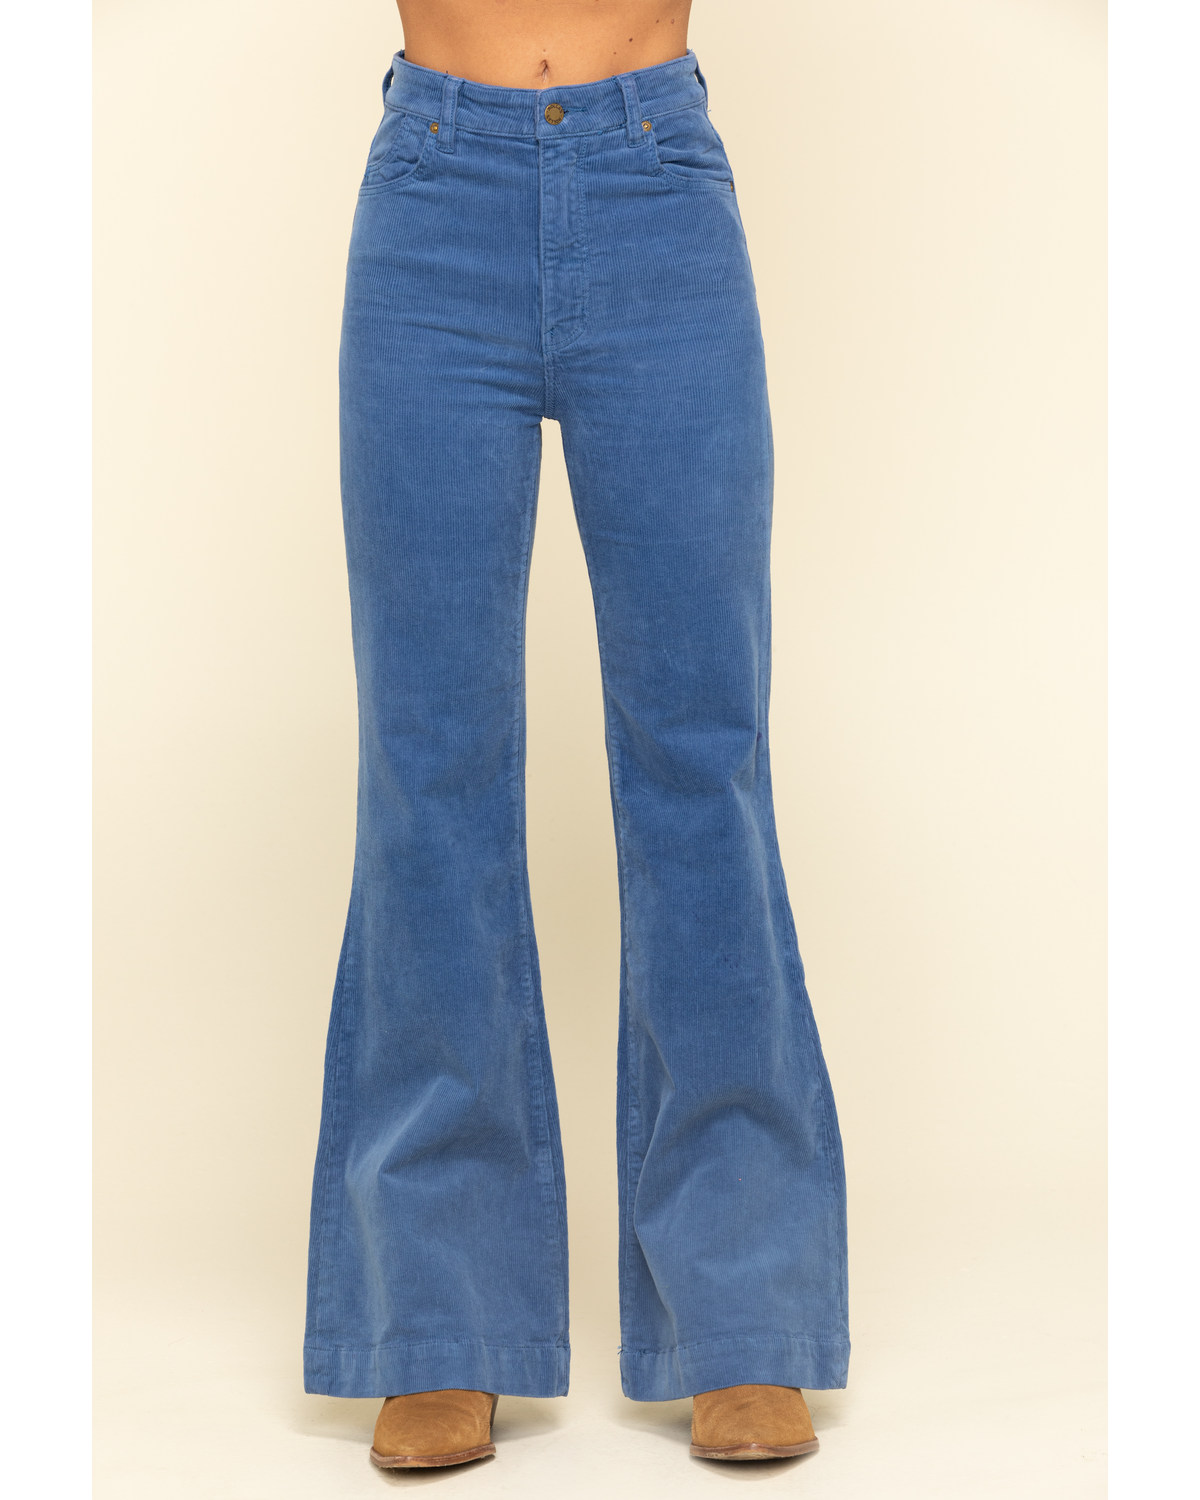 Rolla's Women's French Blue Corduroy Jeans | Boot Barn